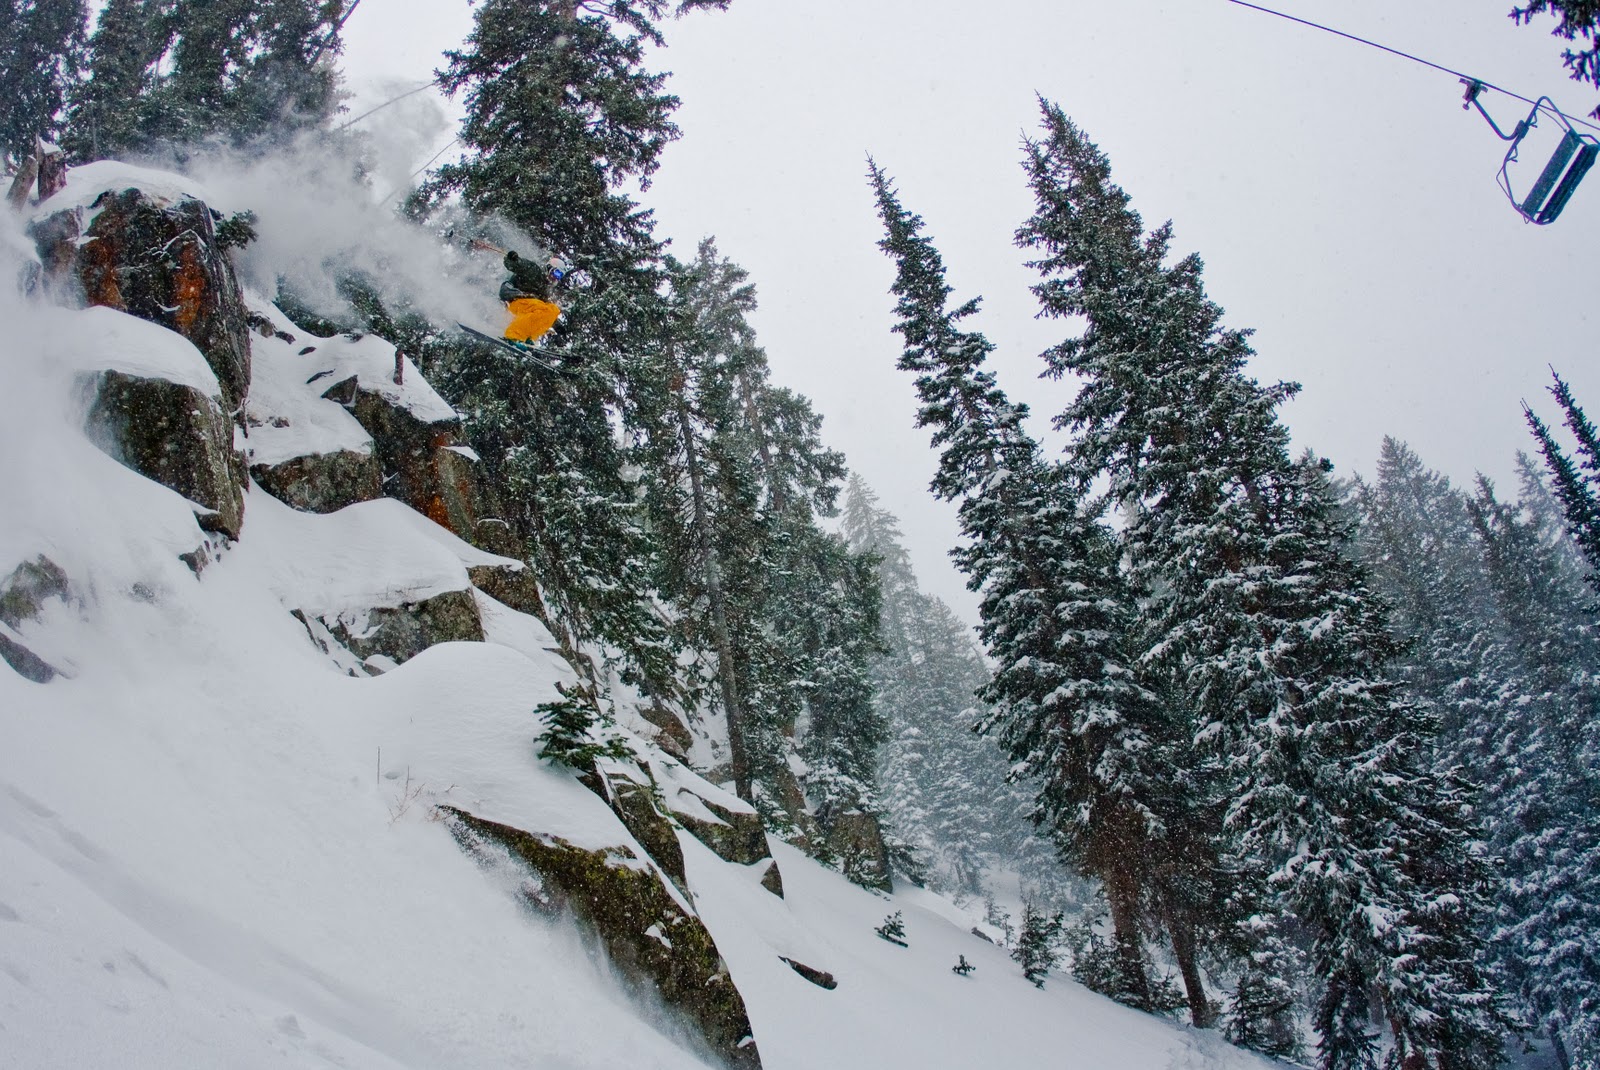 The infamous Hollywood Cliff under the Crest Express at Brighton Ski Resort. Photo Credit: New Schoolers